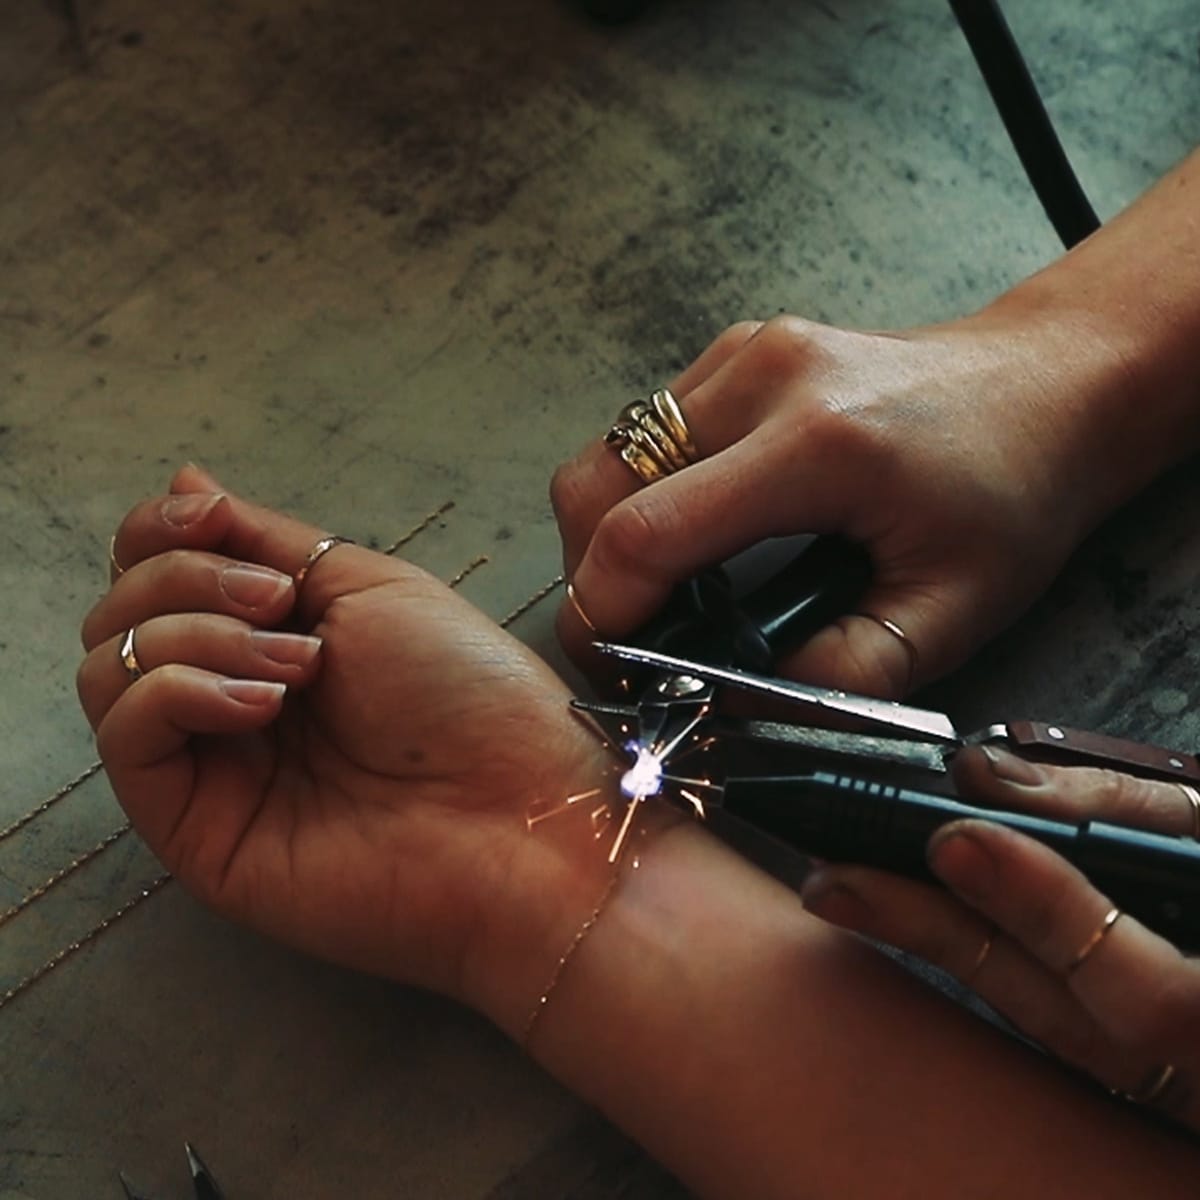 Permanent bracelets or necklaces have no clasps and are attached to the wearer by welding the chain